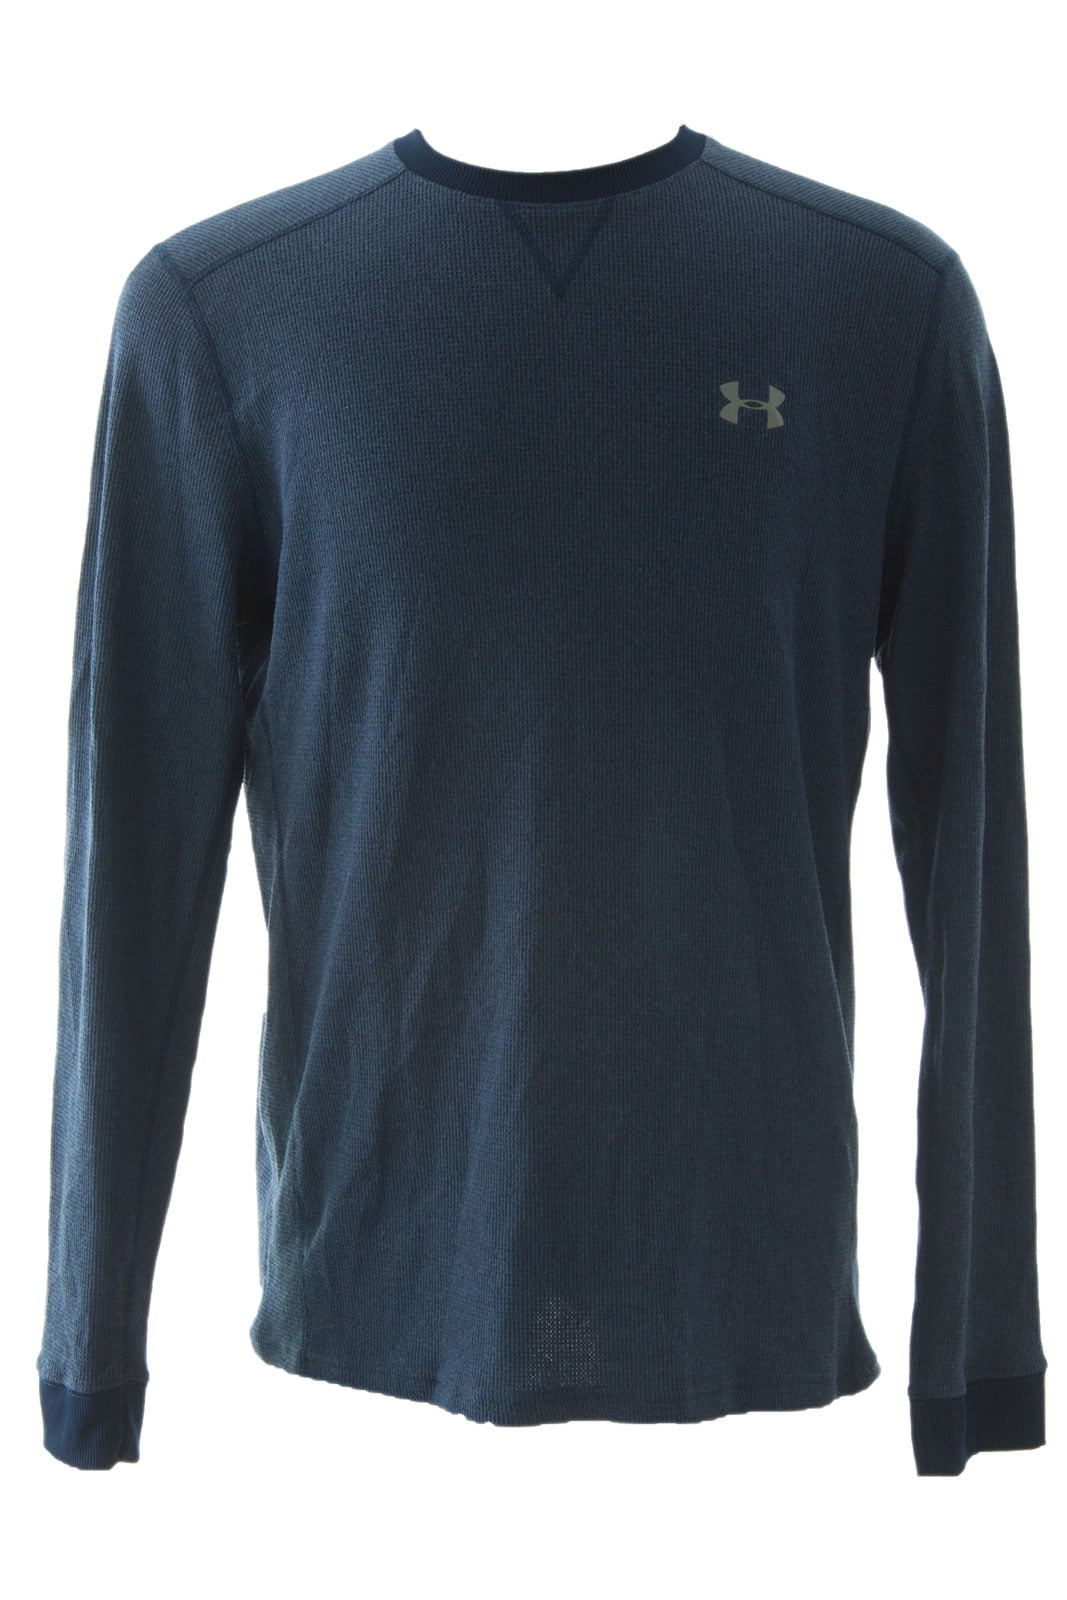 men's under armour thermal long sleeve